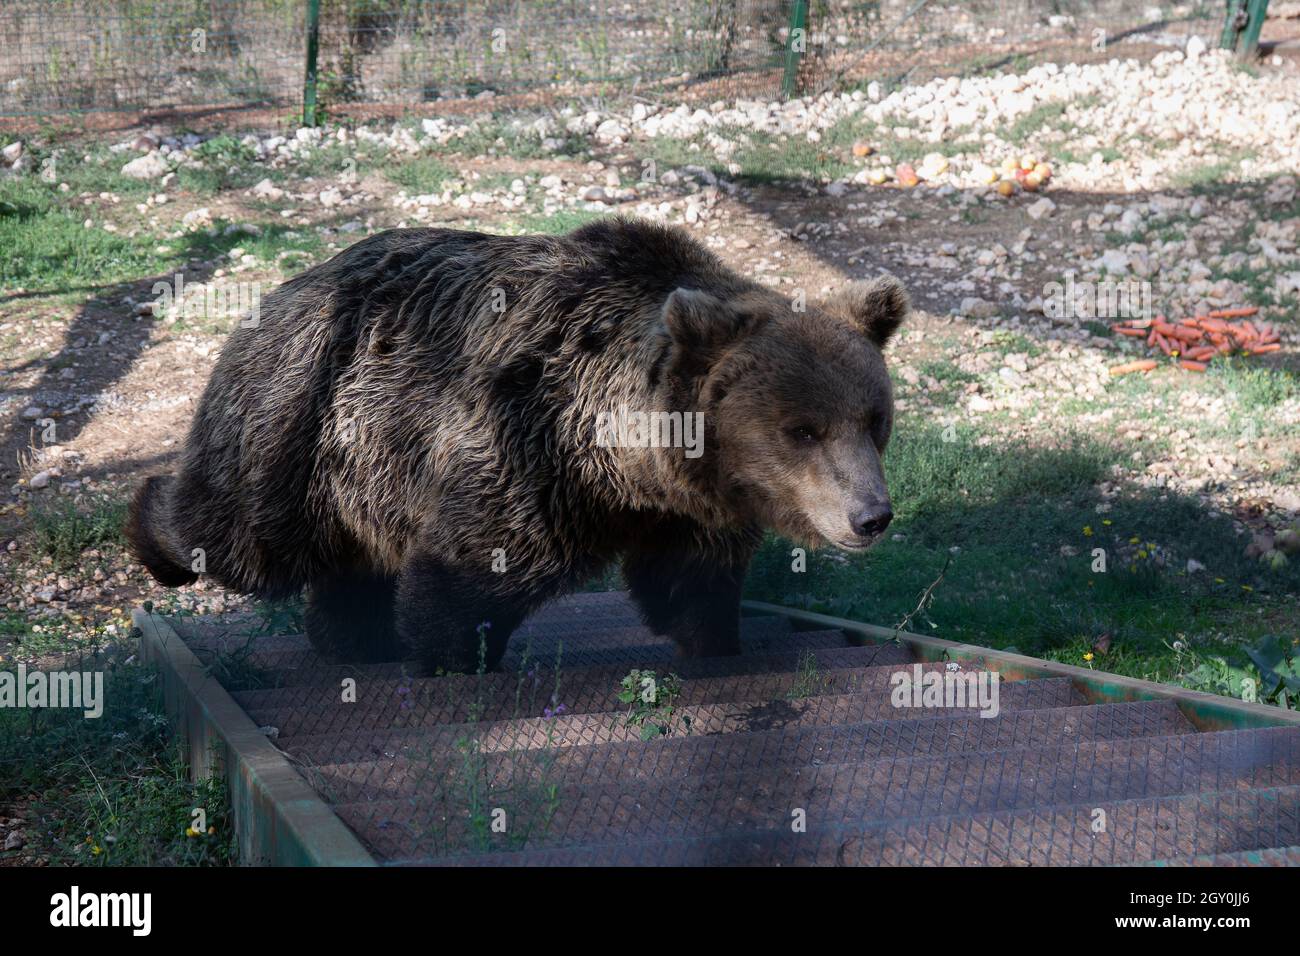 European brown bear in captivity, in an enclosed wildlife area. Stock Photo